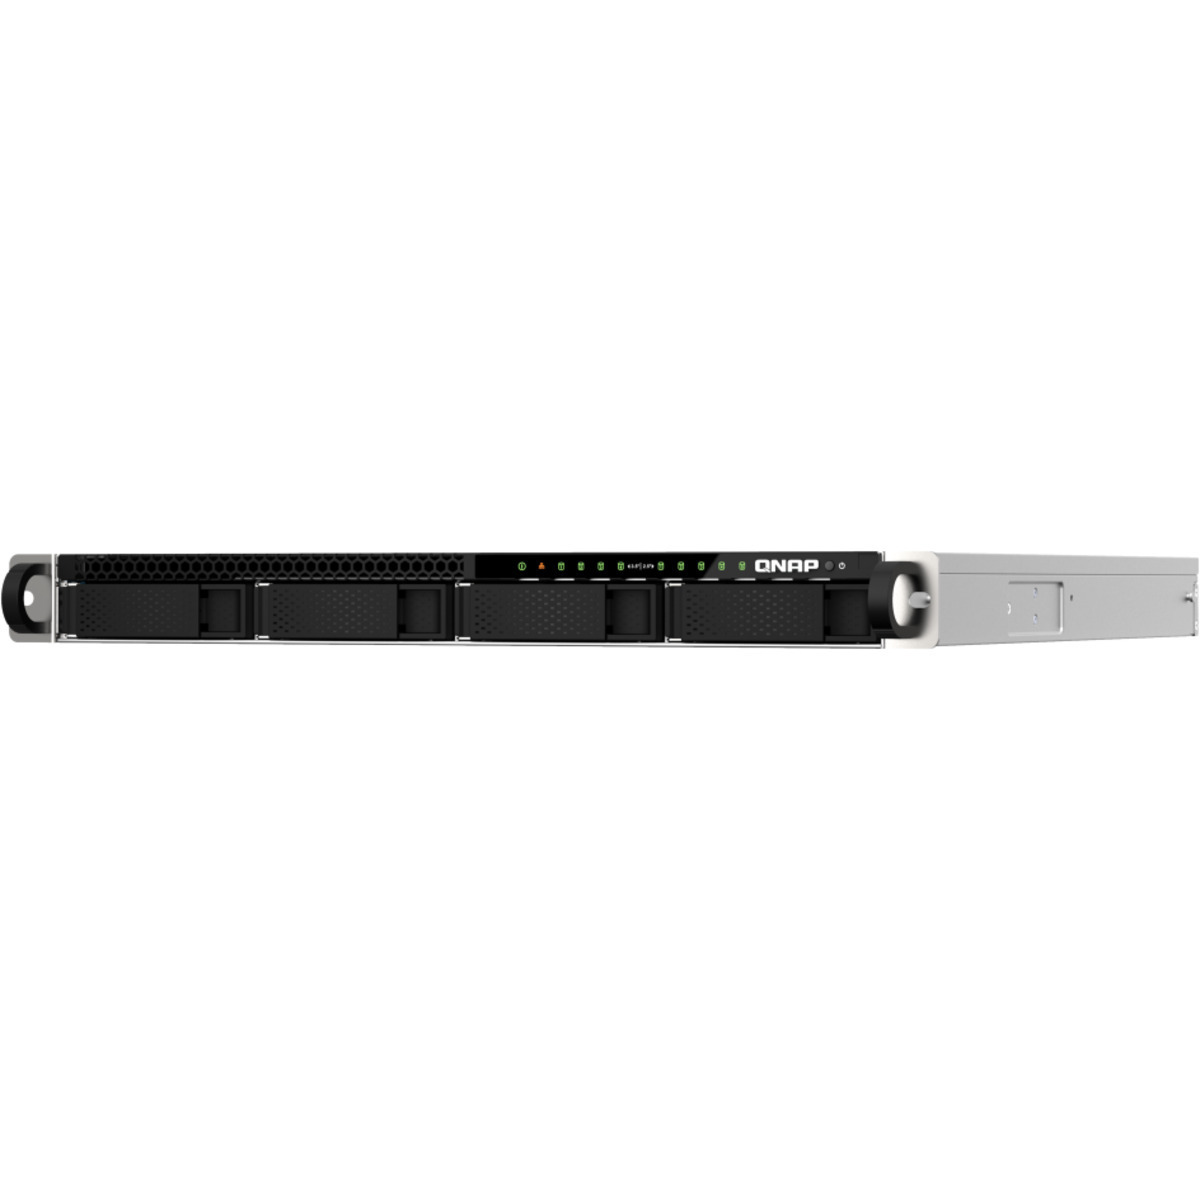 QNAP TS-h987XU-RP QuTS hero Edition RackMount 4-Bay Large Business / Enterprise NAS - Network Attached Storage Device Burn-In Tested Configurations TS-h987XU-RP QuTS hero Edition